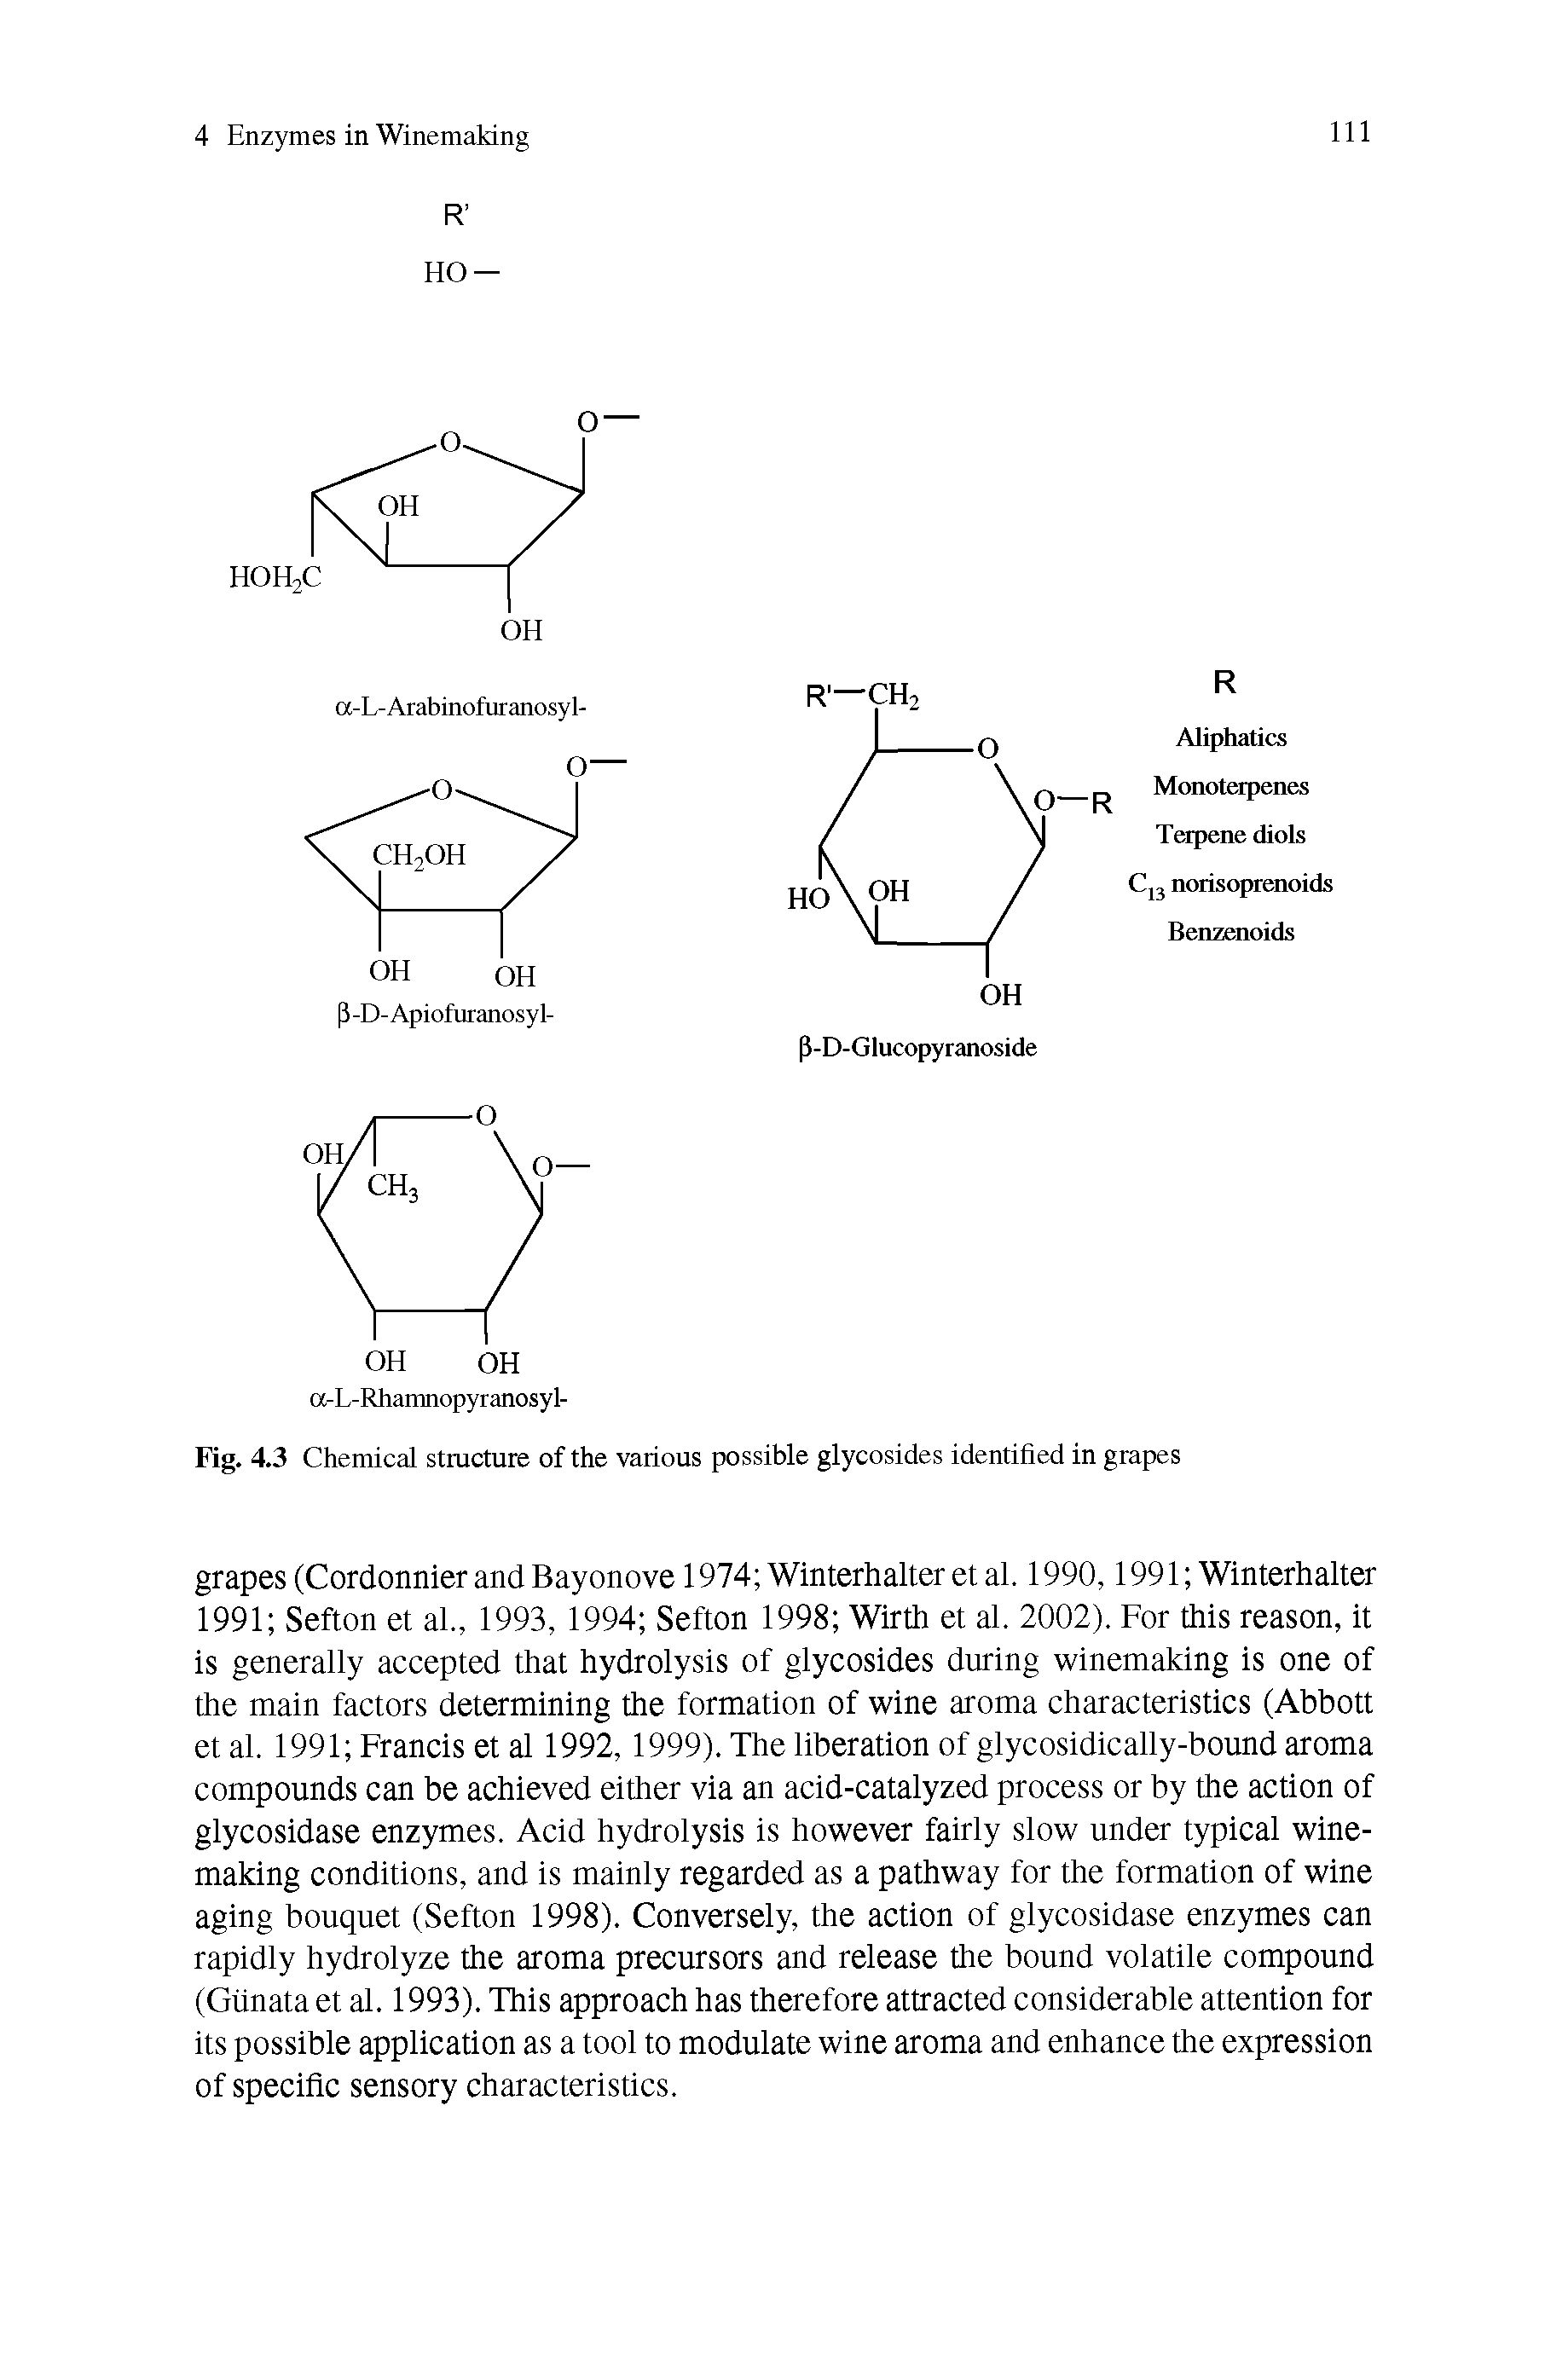 Fig. 4.3 Chemical structure of the various possible glycosides identified in grapes...